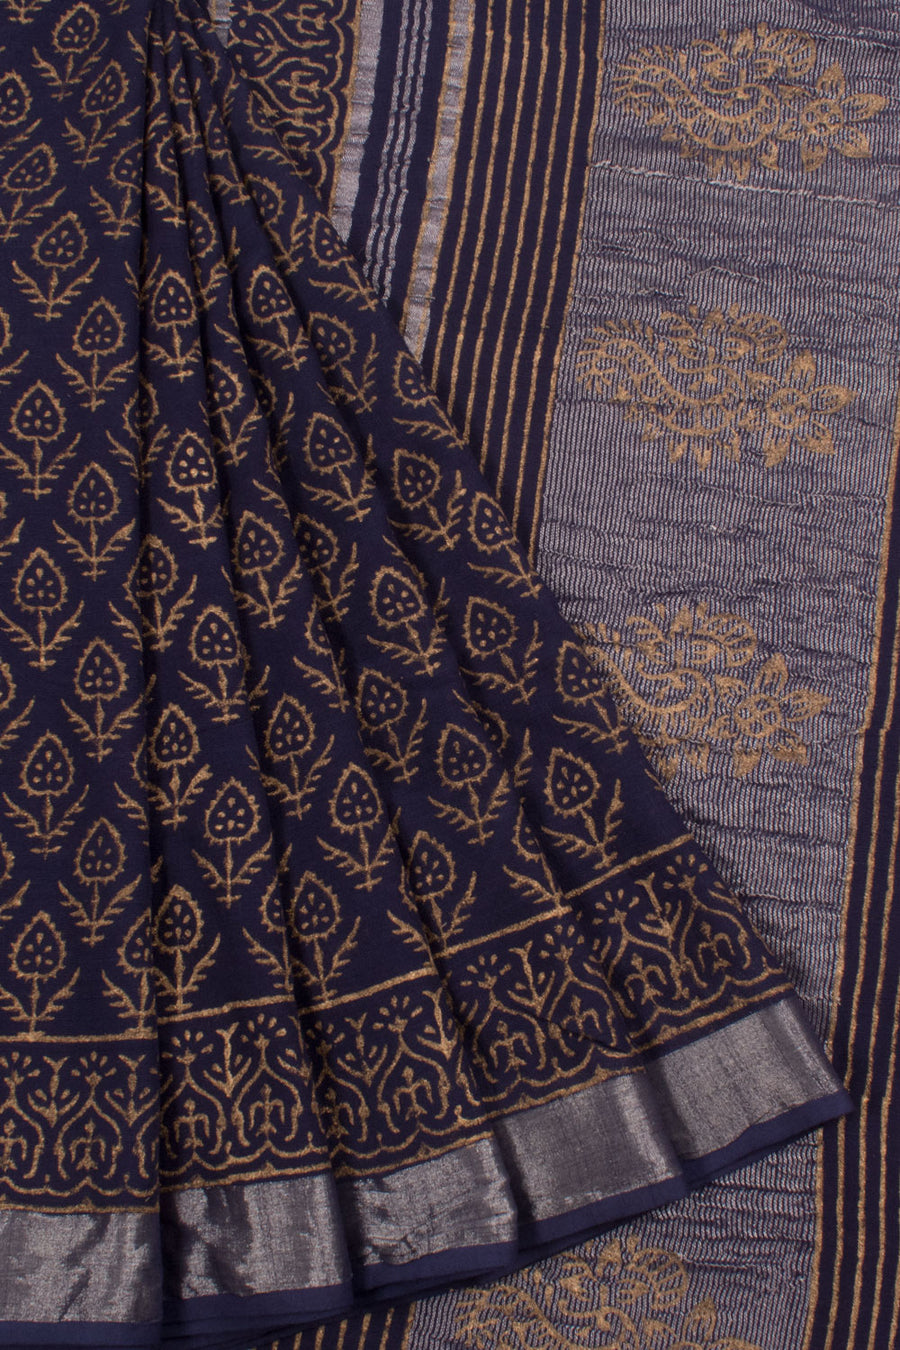 Hand Block Printed Linen Cotton Saree with Floral Motifs and Tissue Border